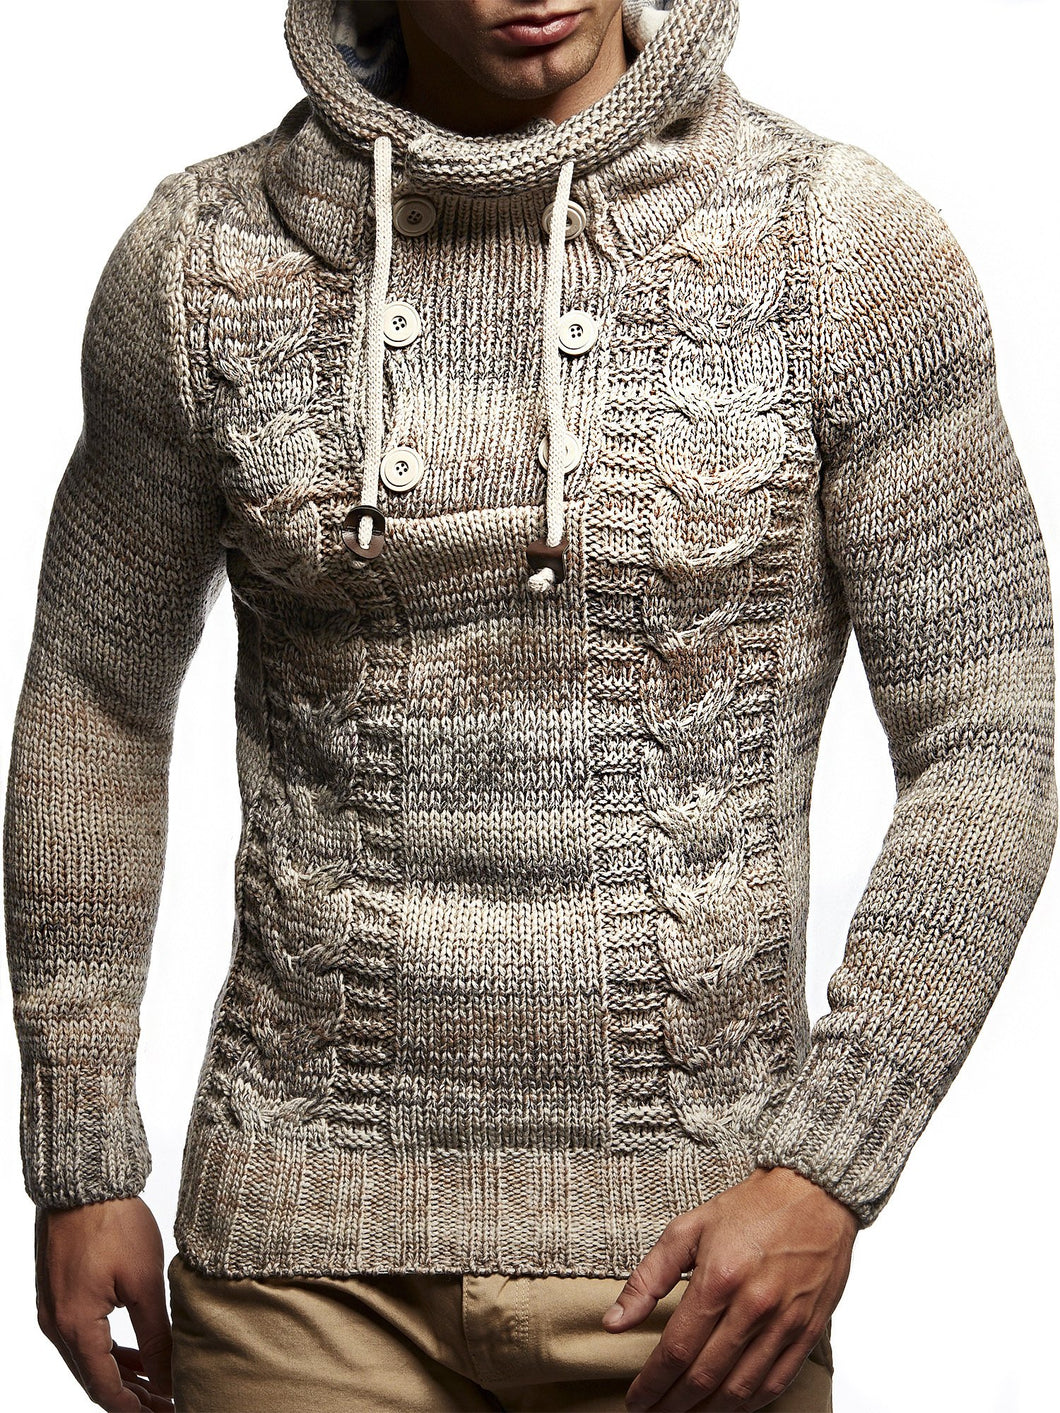 Beige Men's Hooded Cable Knit Long Sleeve Sweater